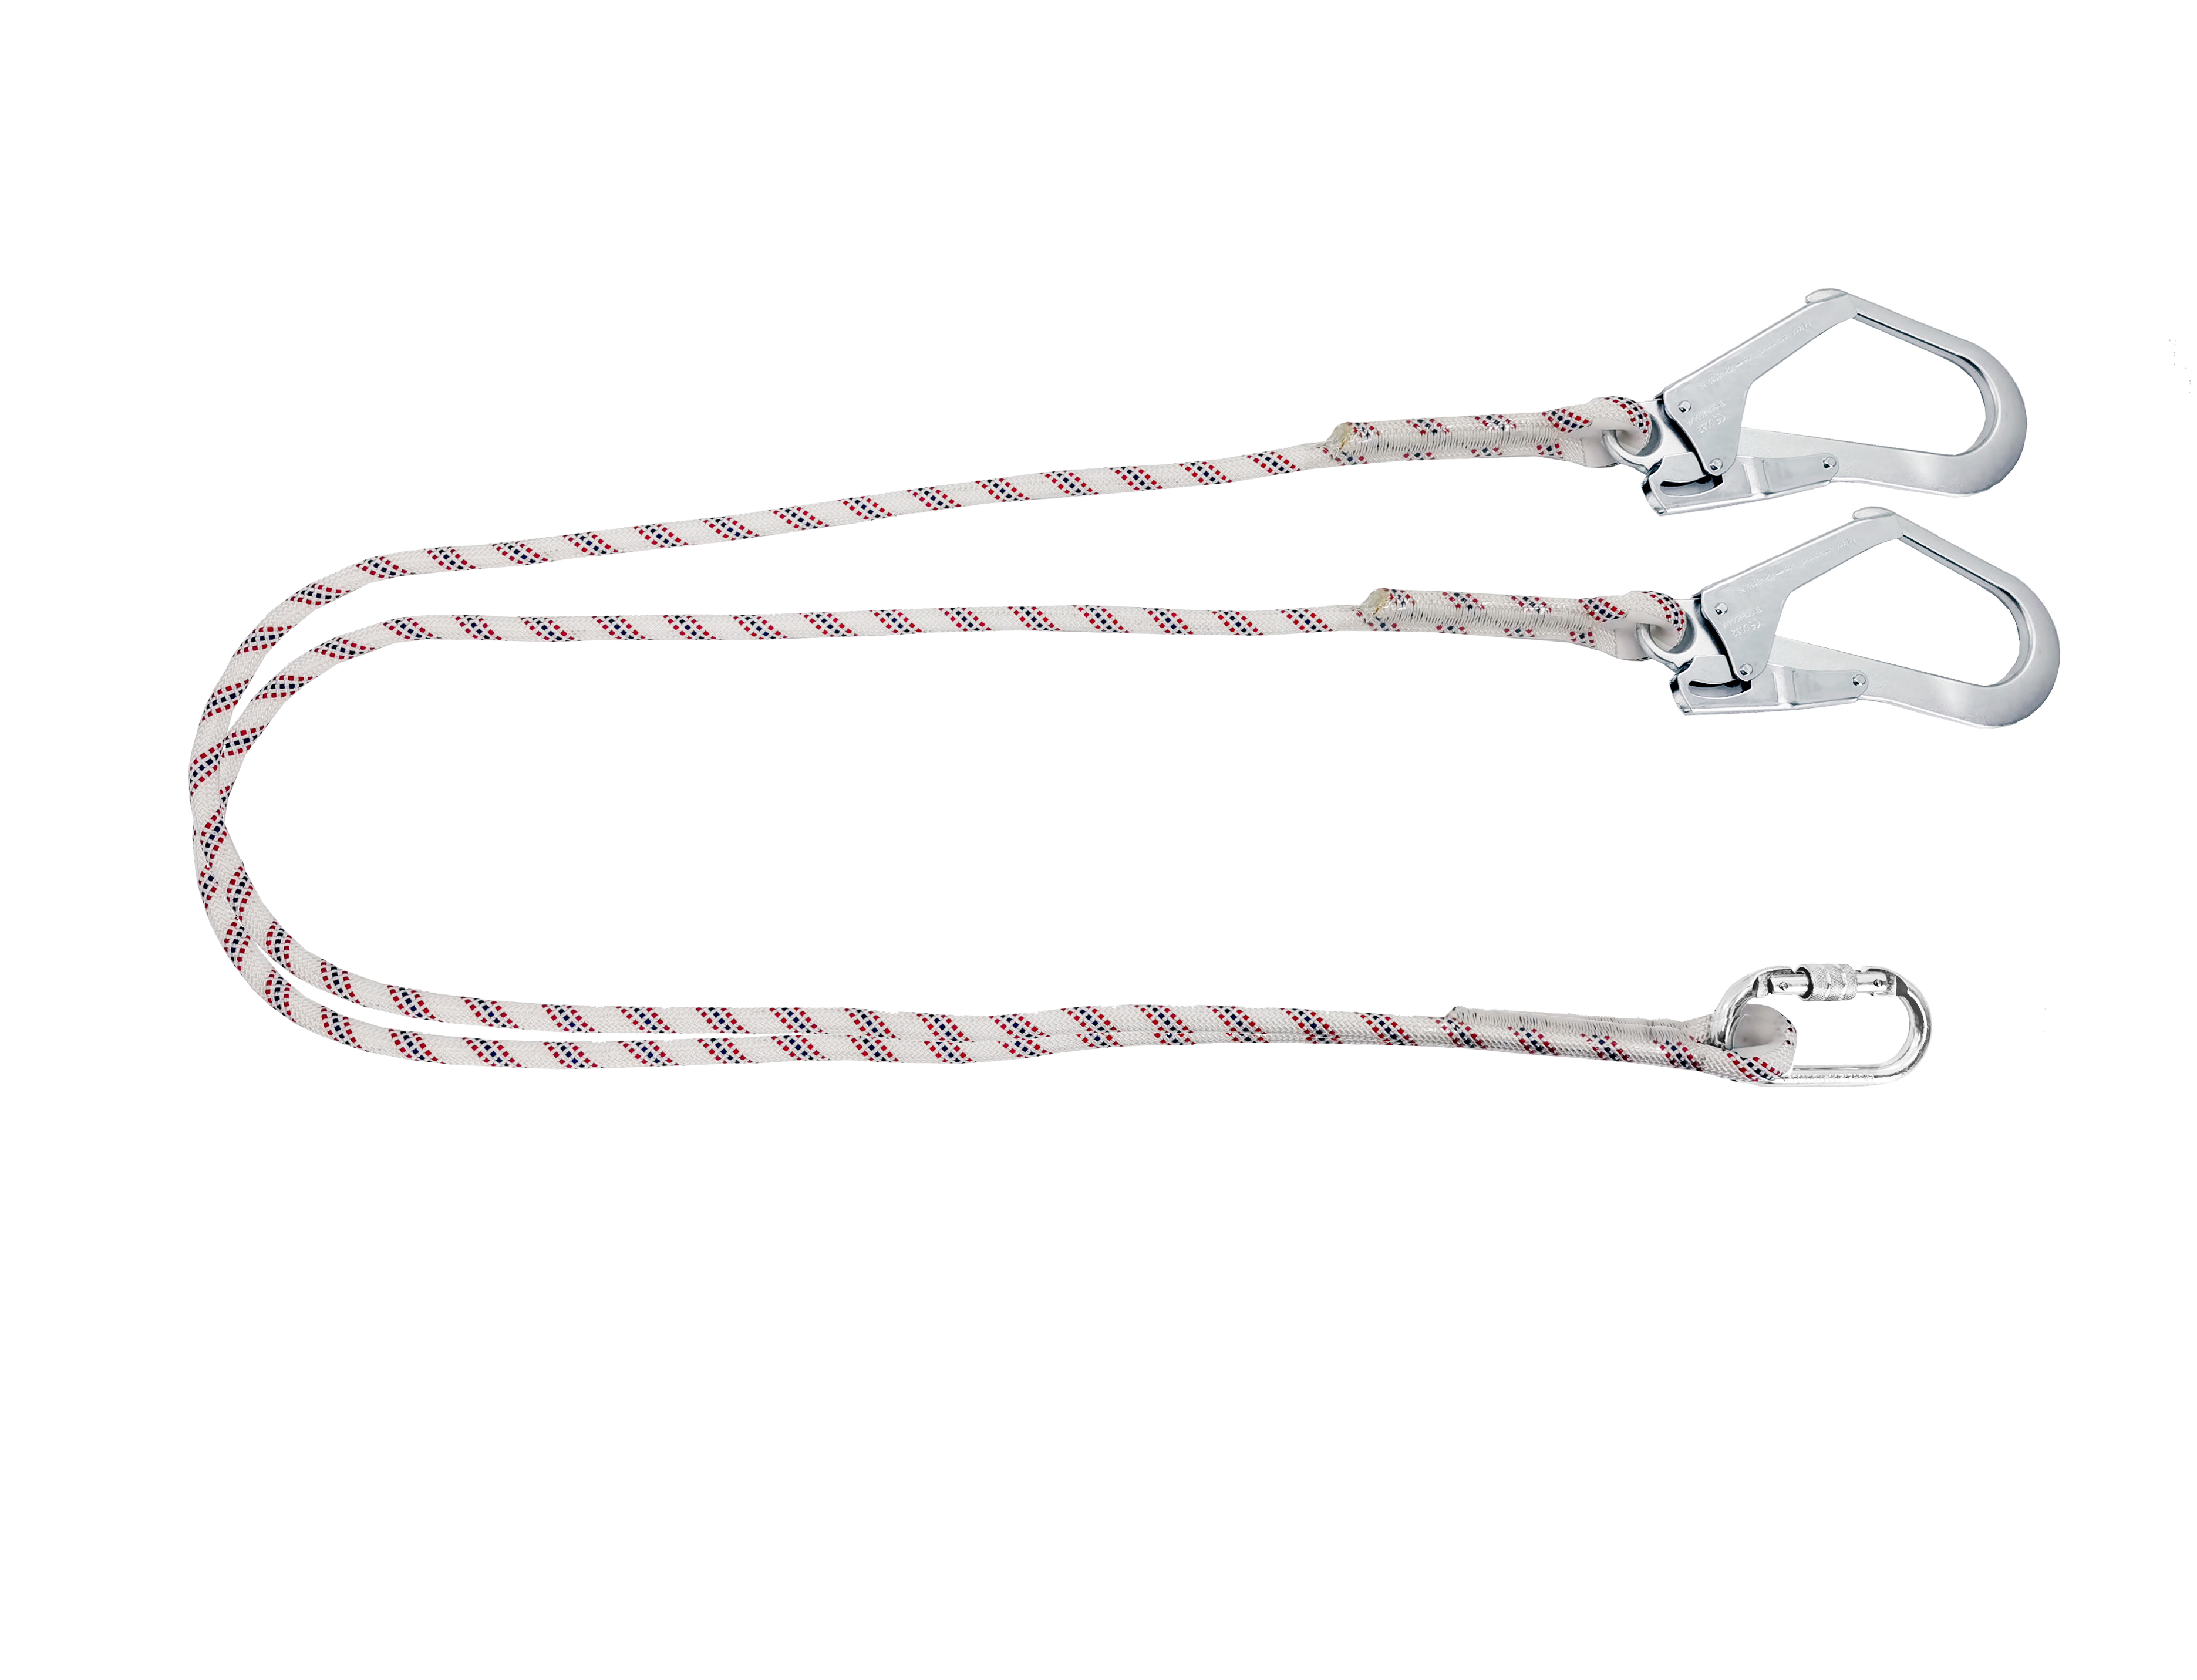 SYL002D Rope Lanyard for Fall Protection with Double Big Hook